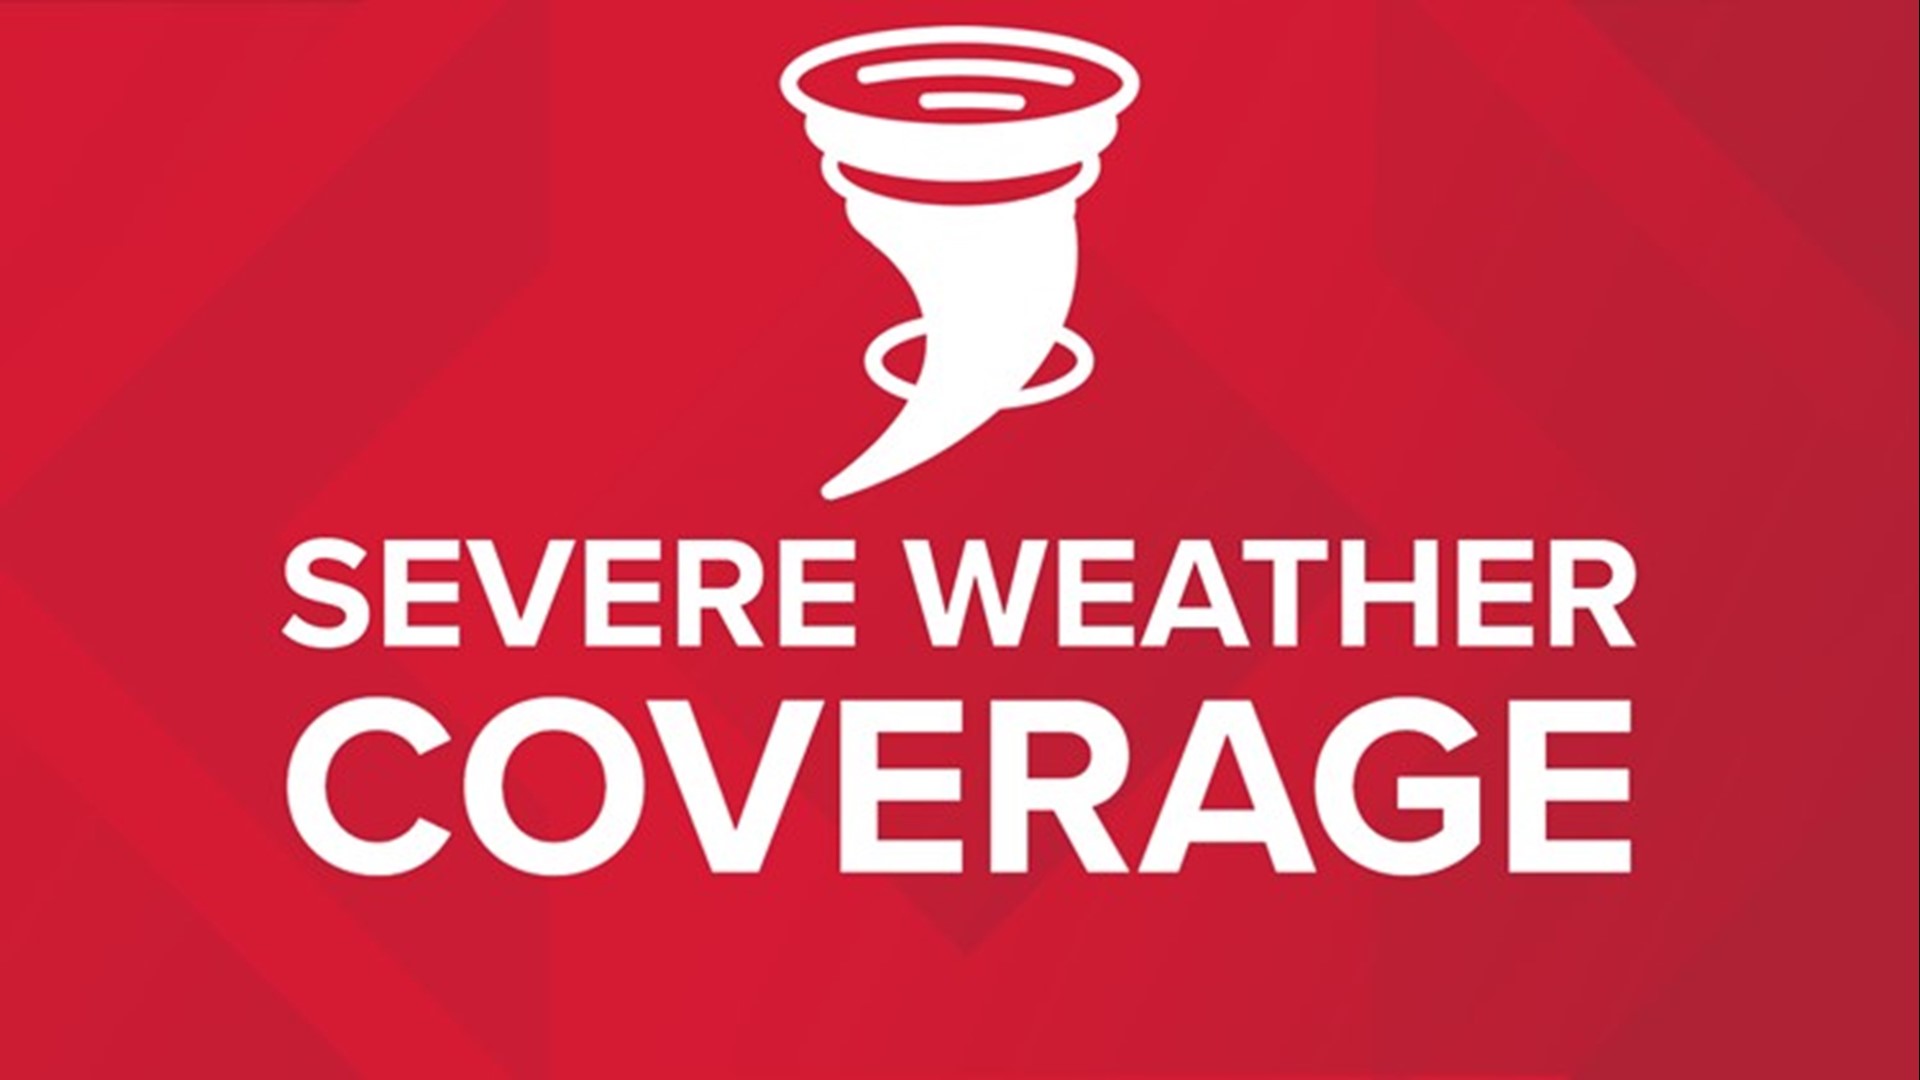 Stay weather aware with live updates from News 8 as strong thunderstorms move into the region. Hail and tornadoes are possible.